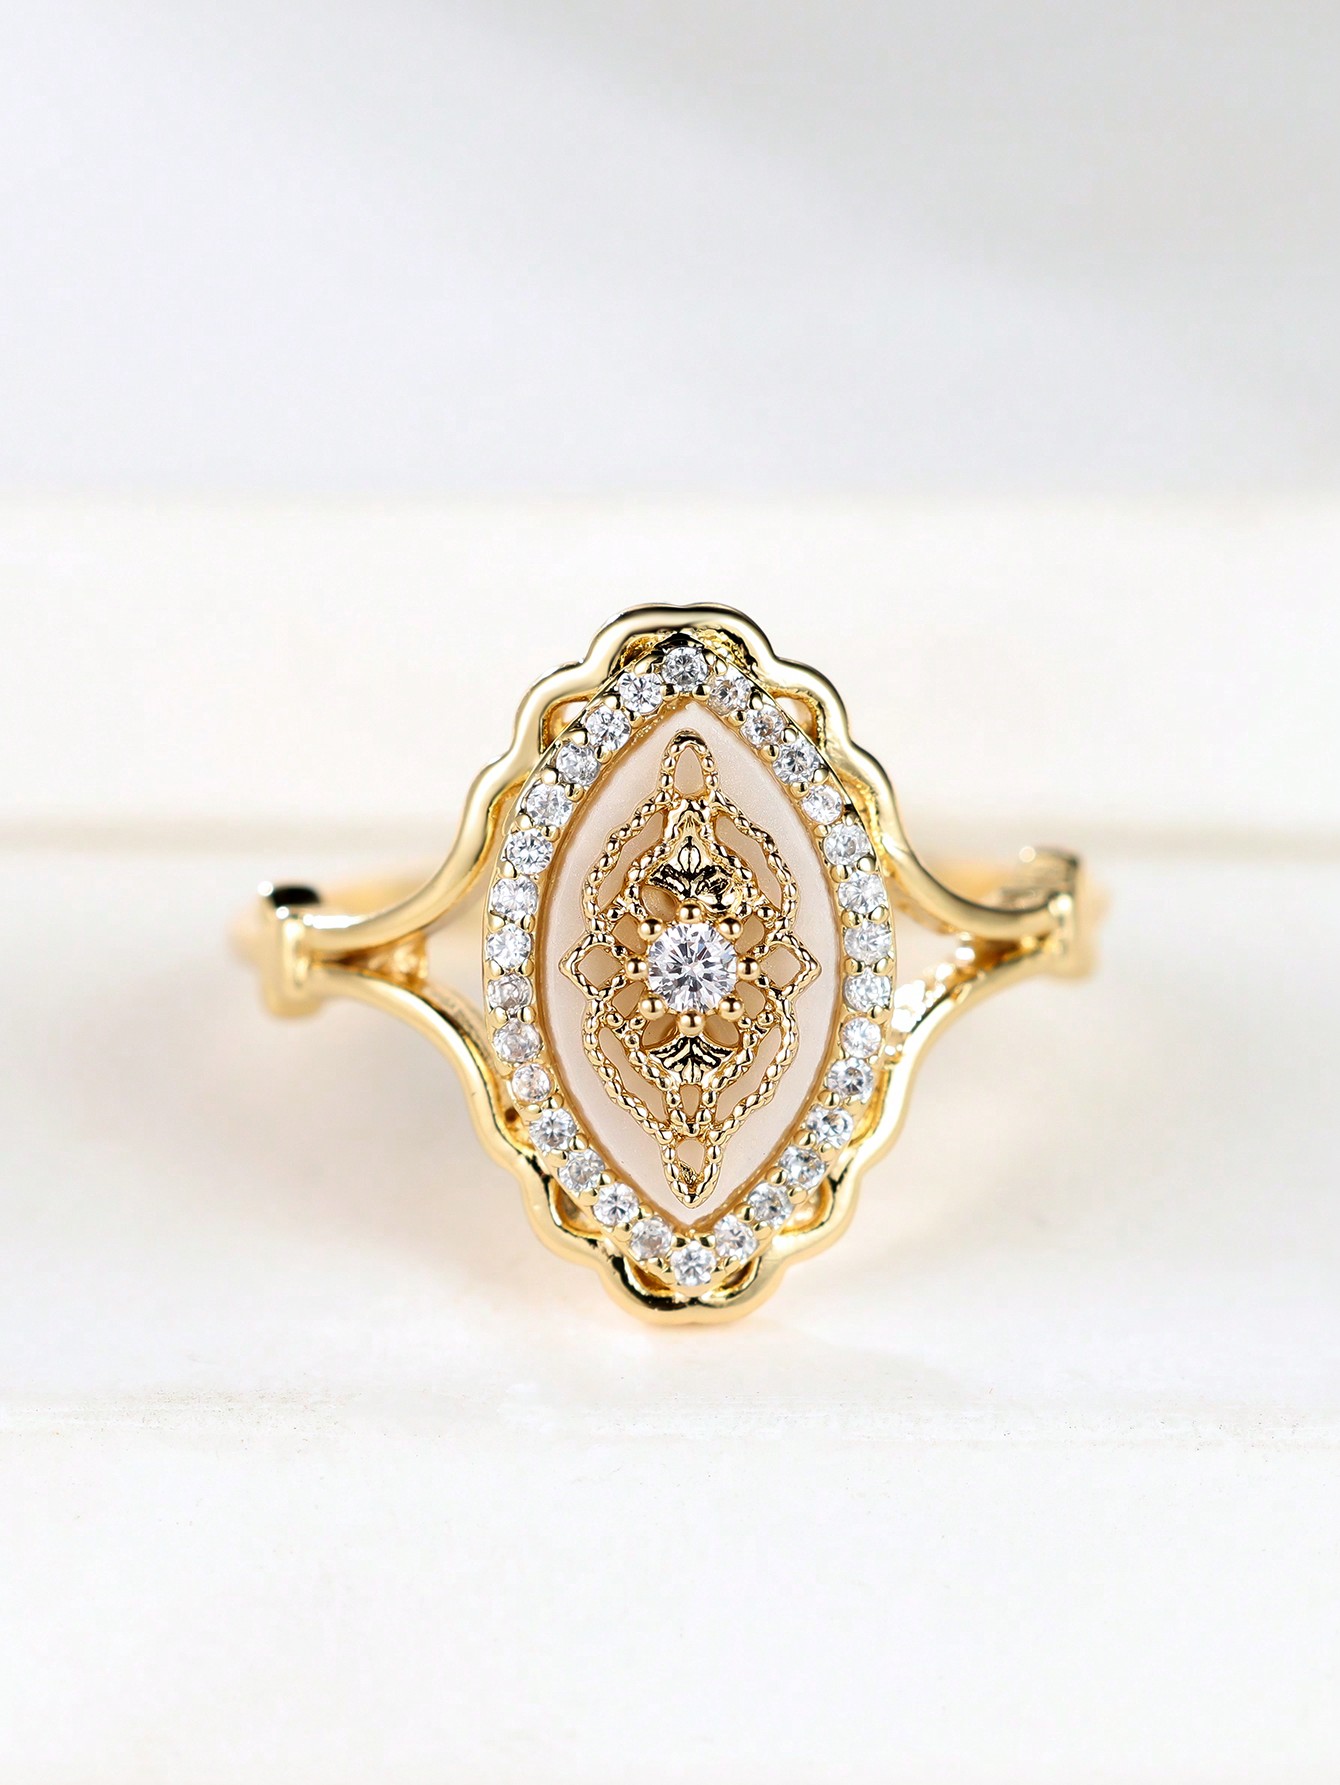 1Pc Vintage Palace Flower Ring Promise Engagement Floral Daily Jewelry